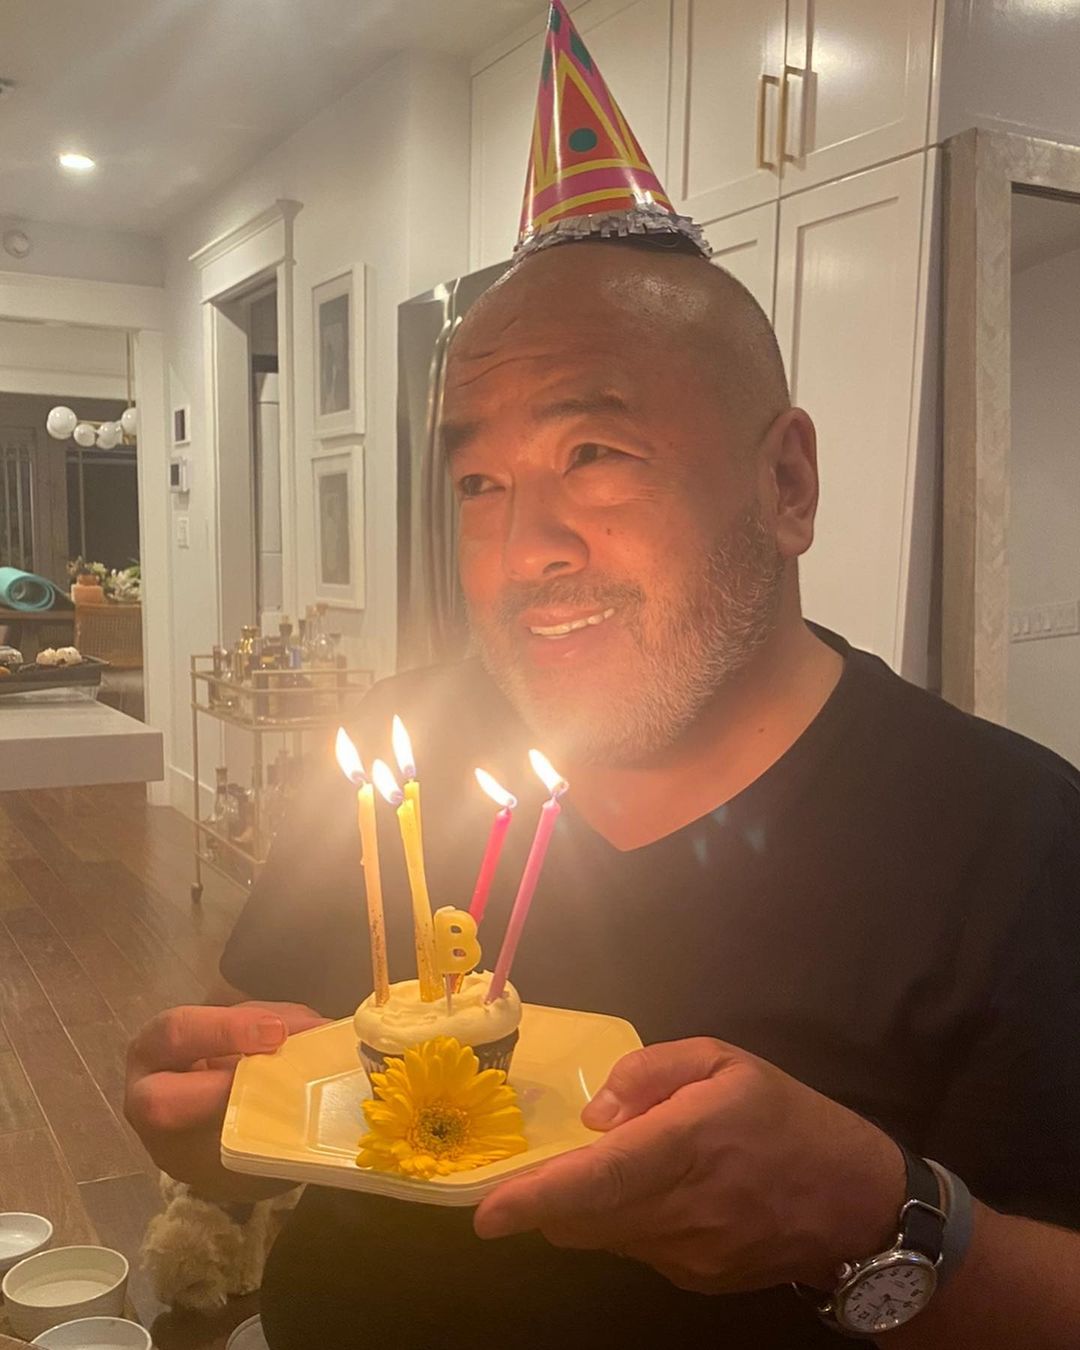 Chloe Bennet wished her father a happy birthday on Instagram